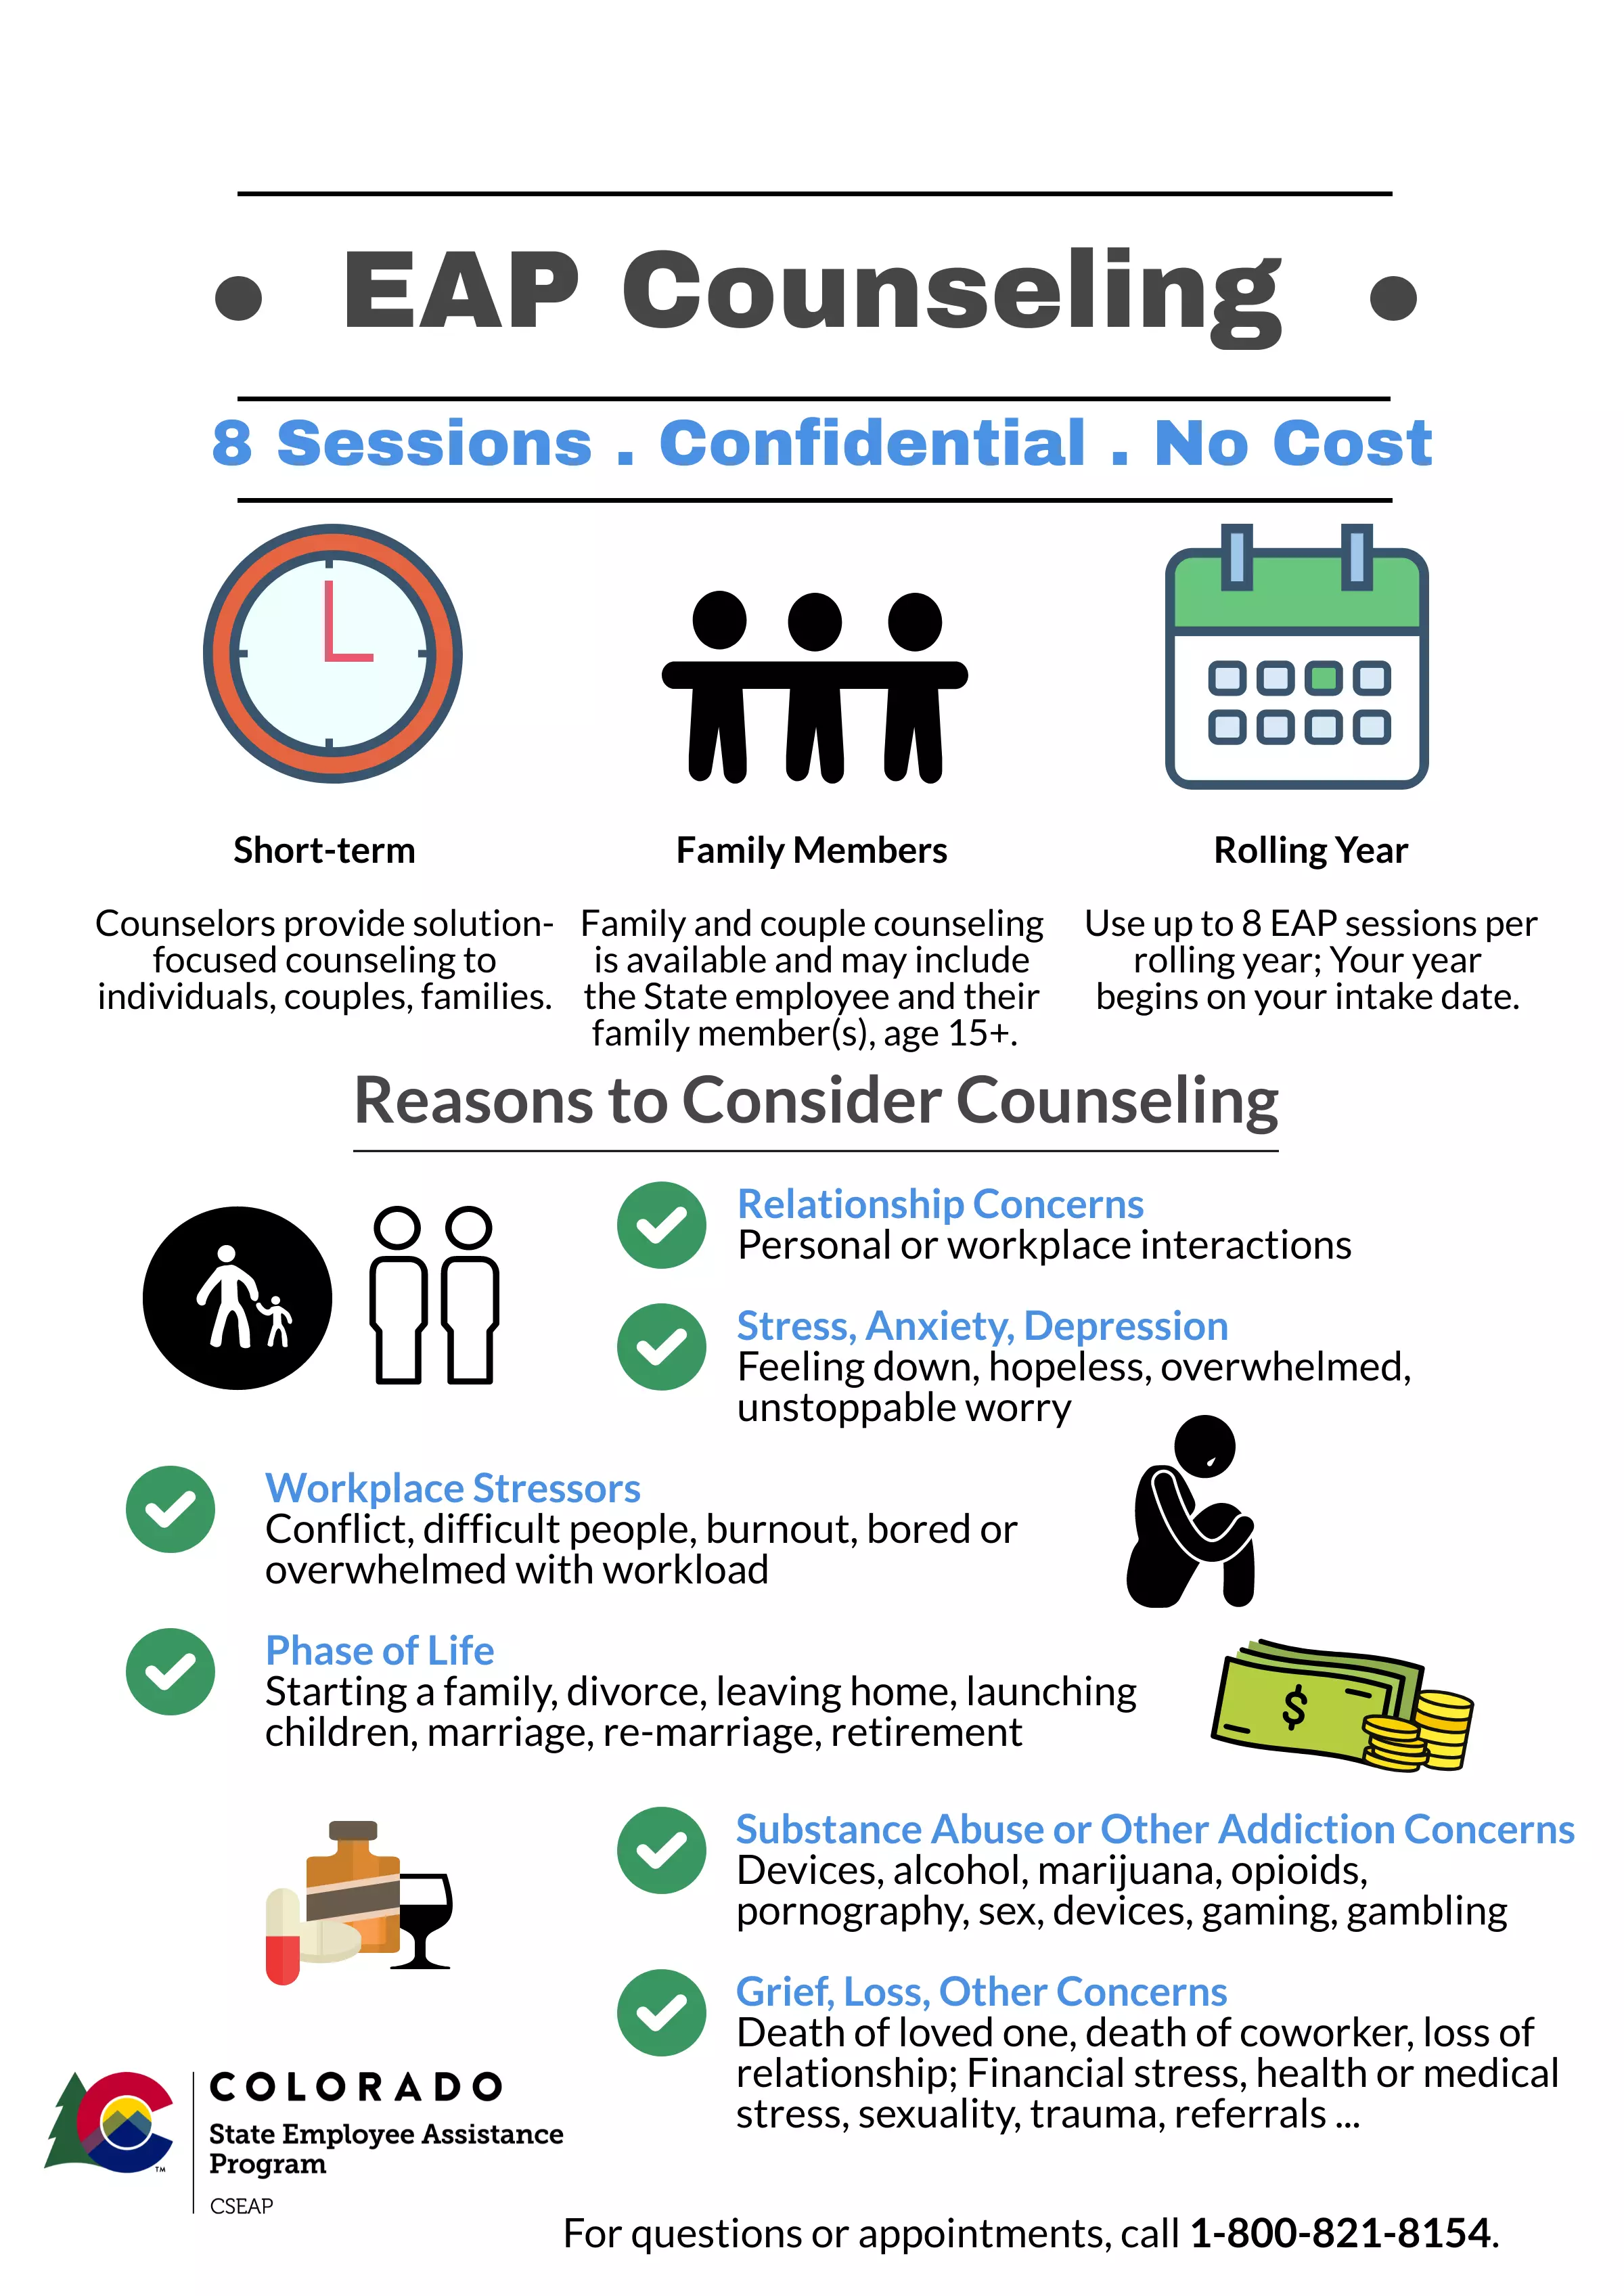 Image provides overview of EAP counseling service for state employees including 8 sessions for individual, couple, or family counseling on various concerns. 